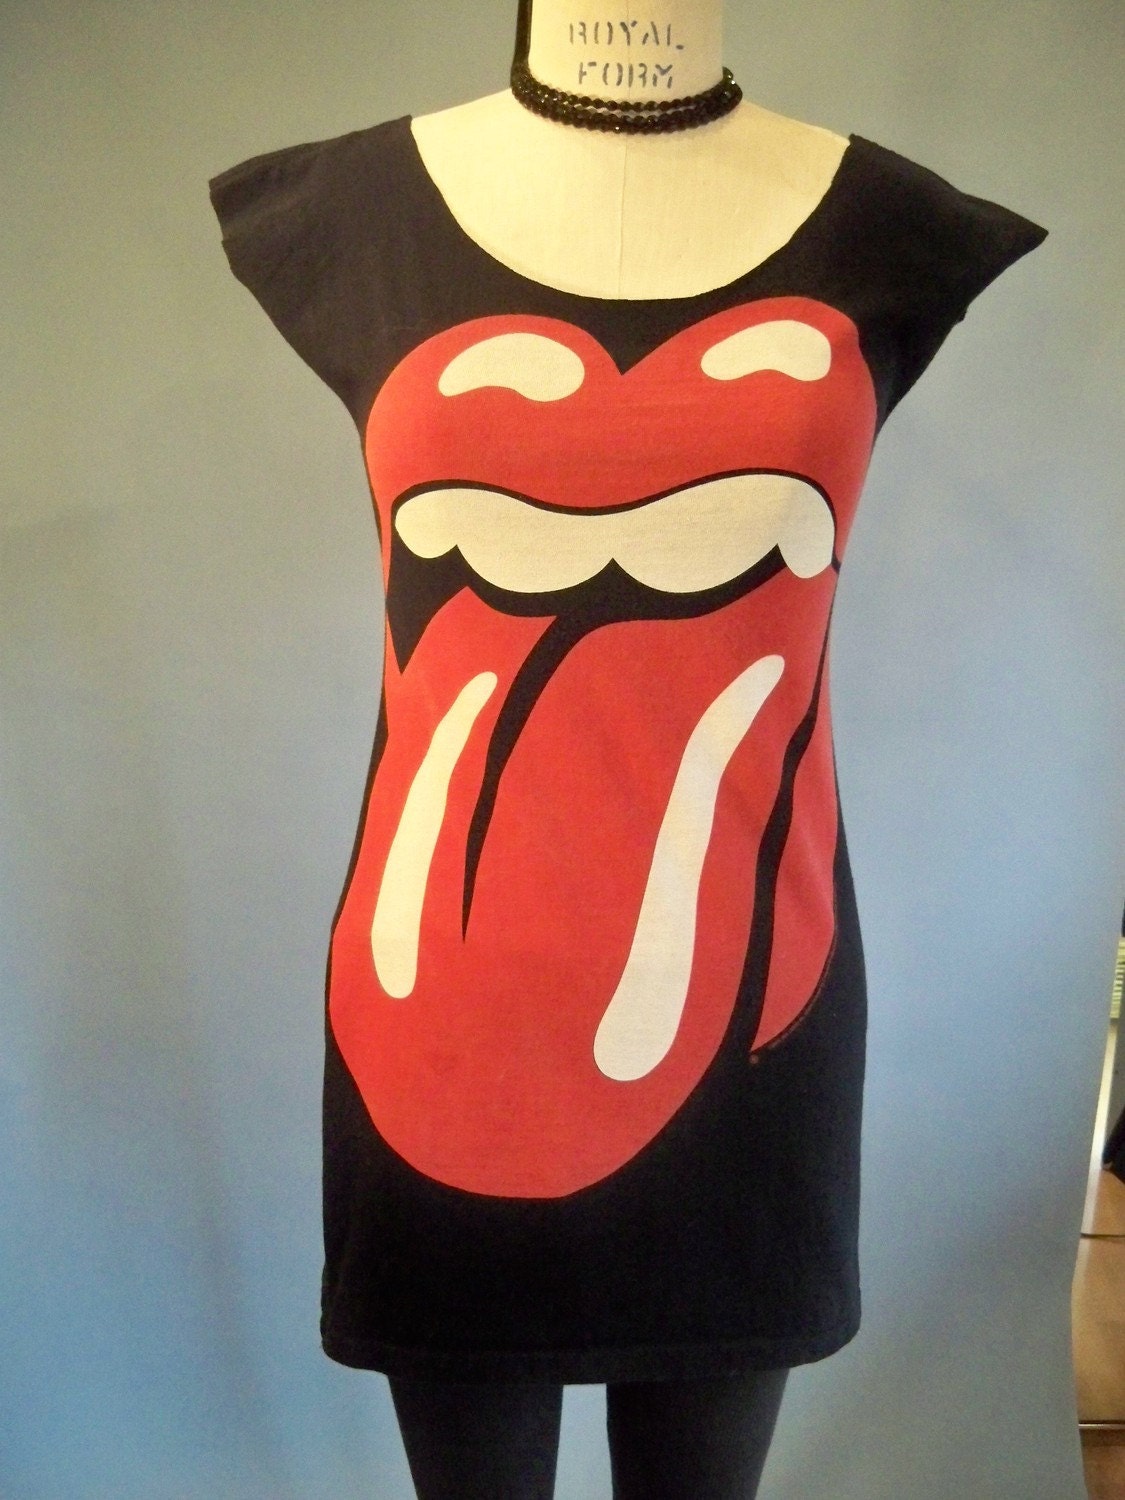 Sexy Rolling Stones Reshaped T Shirt Dress 3331